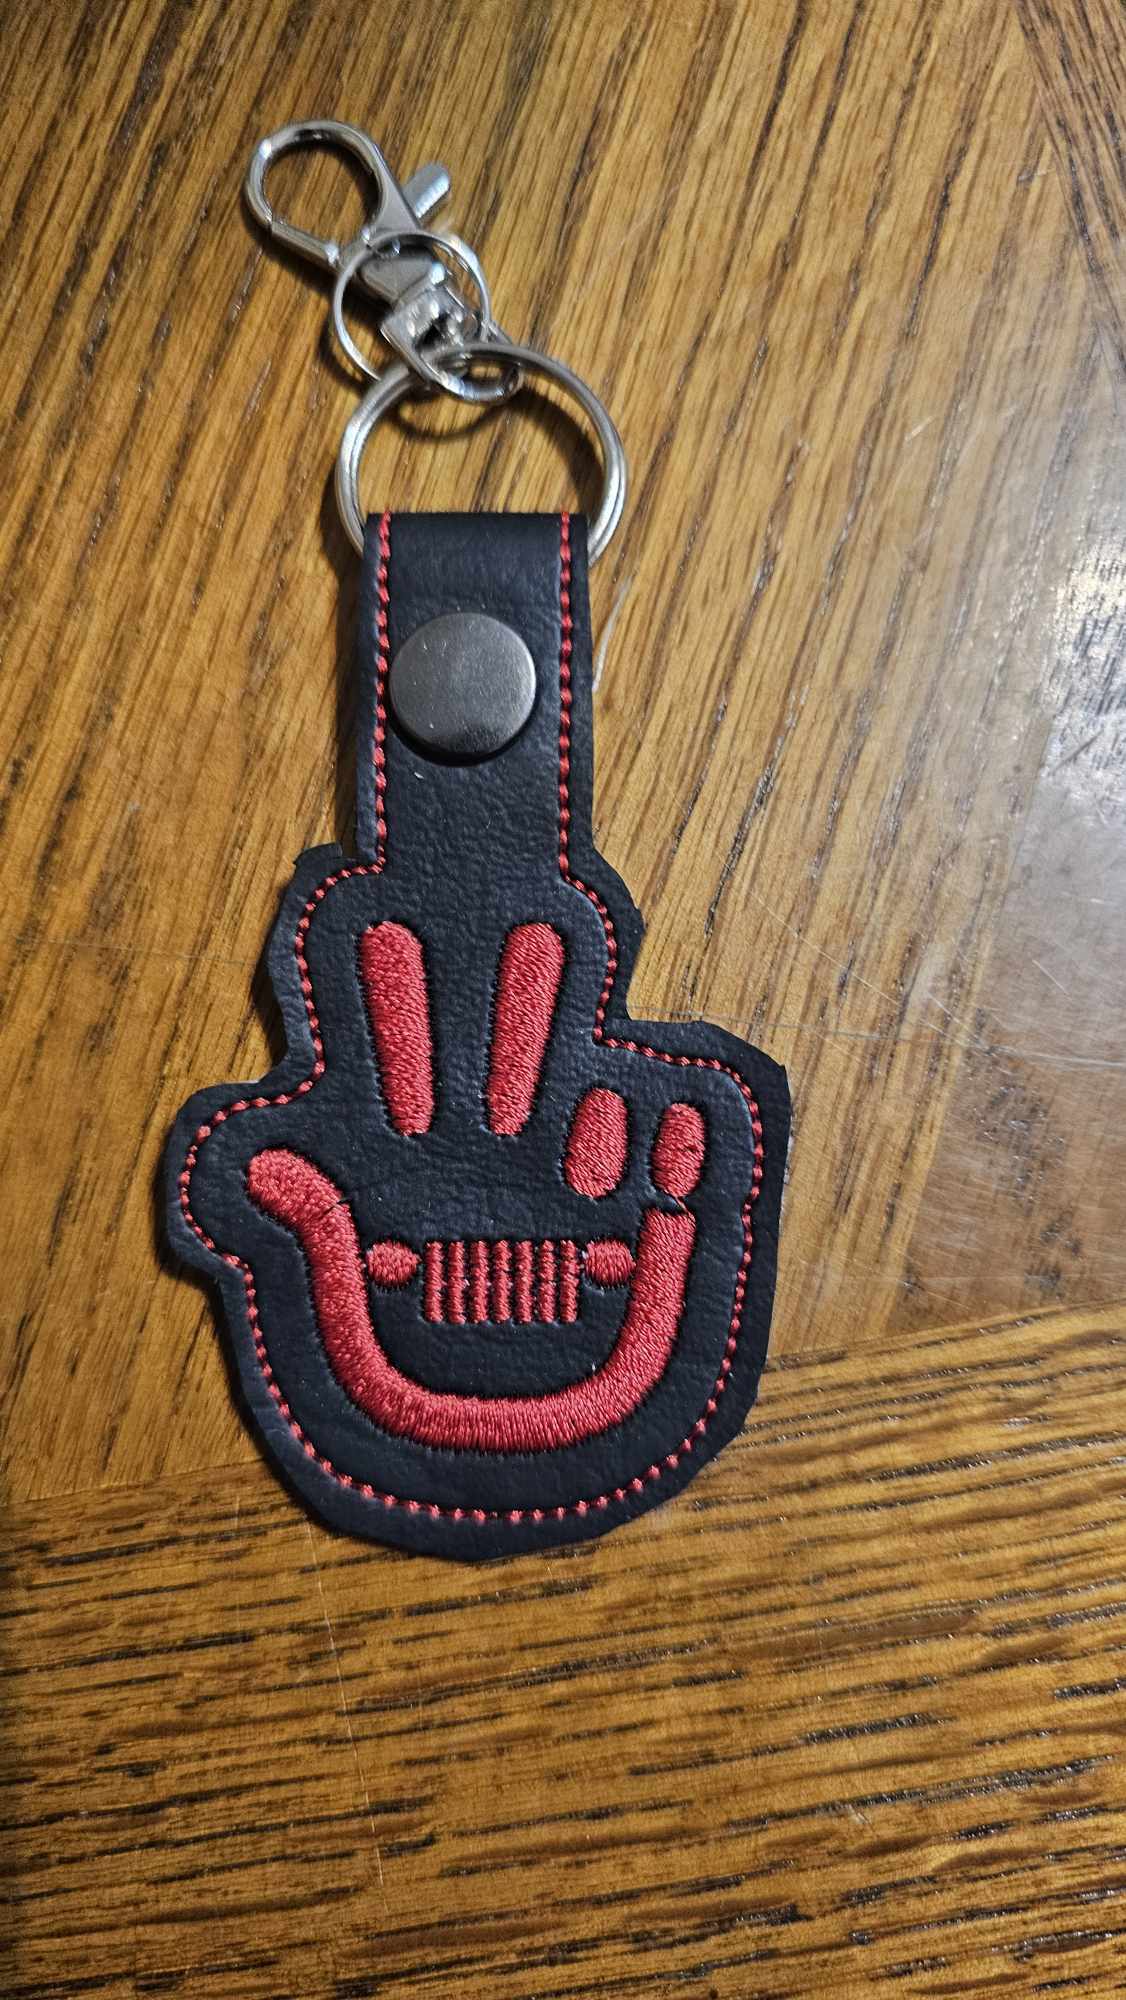 Custom Embroidered key chains